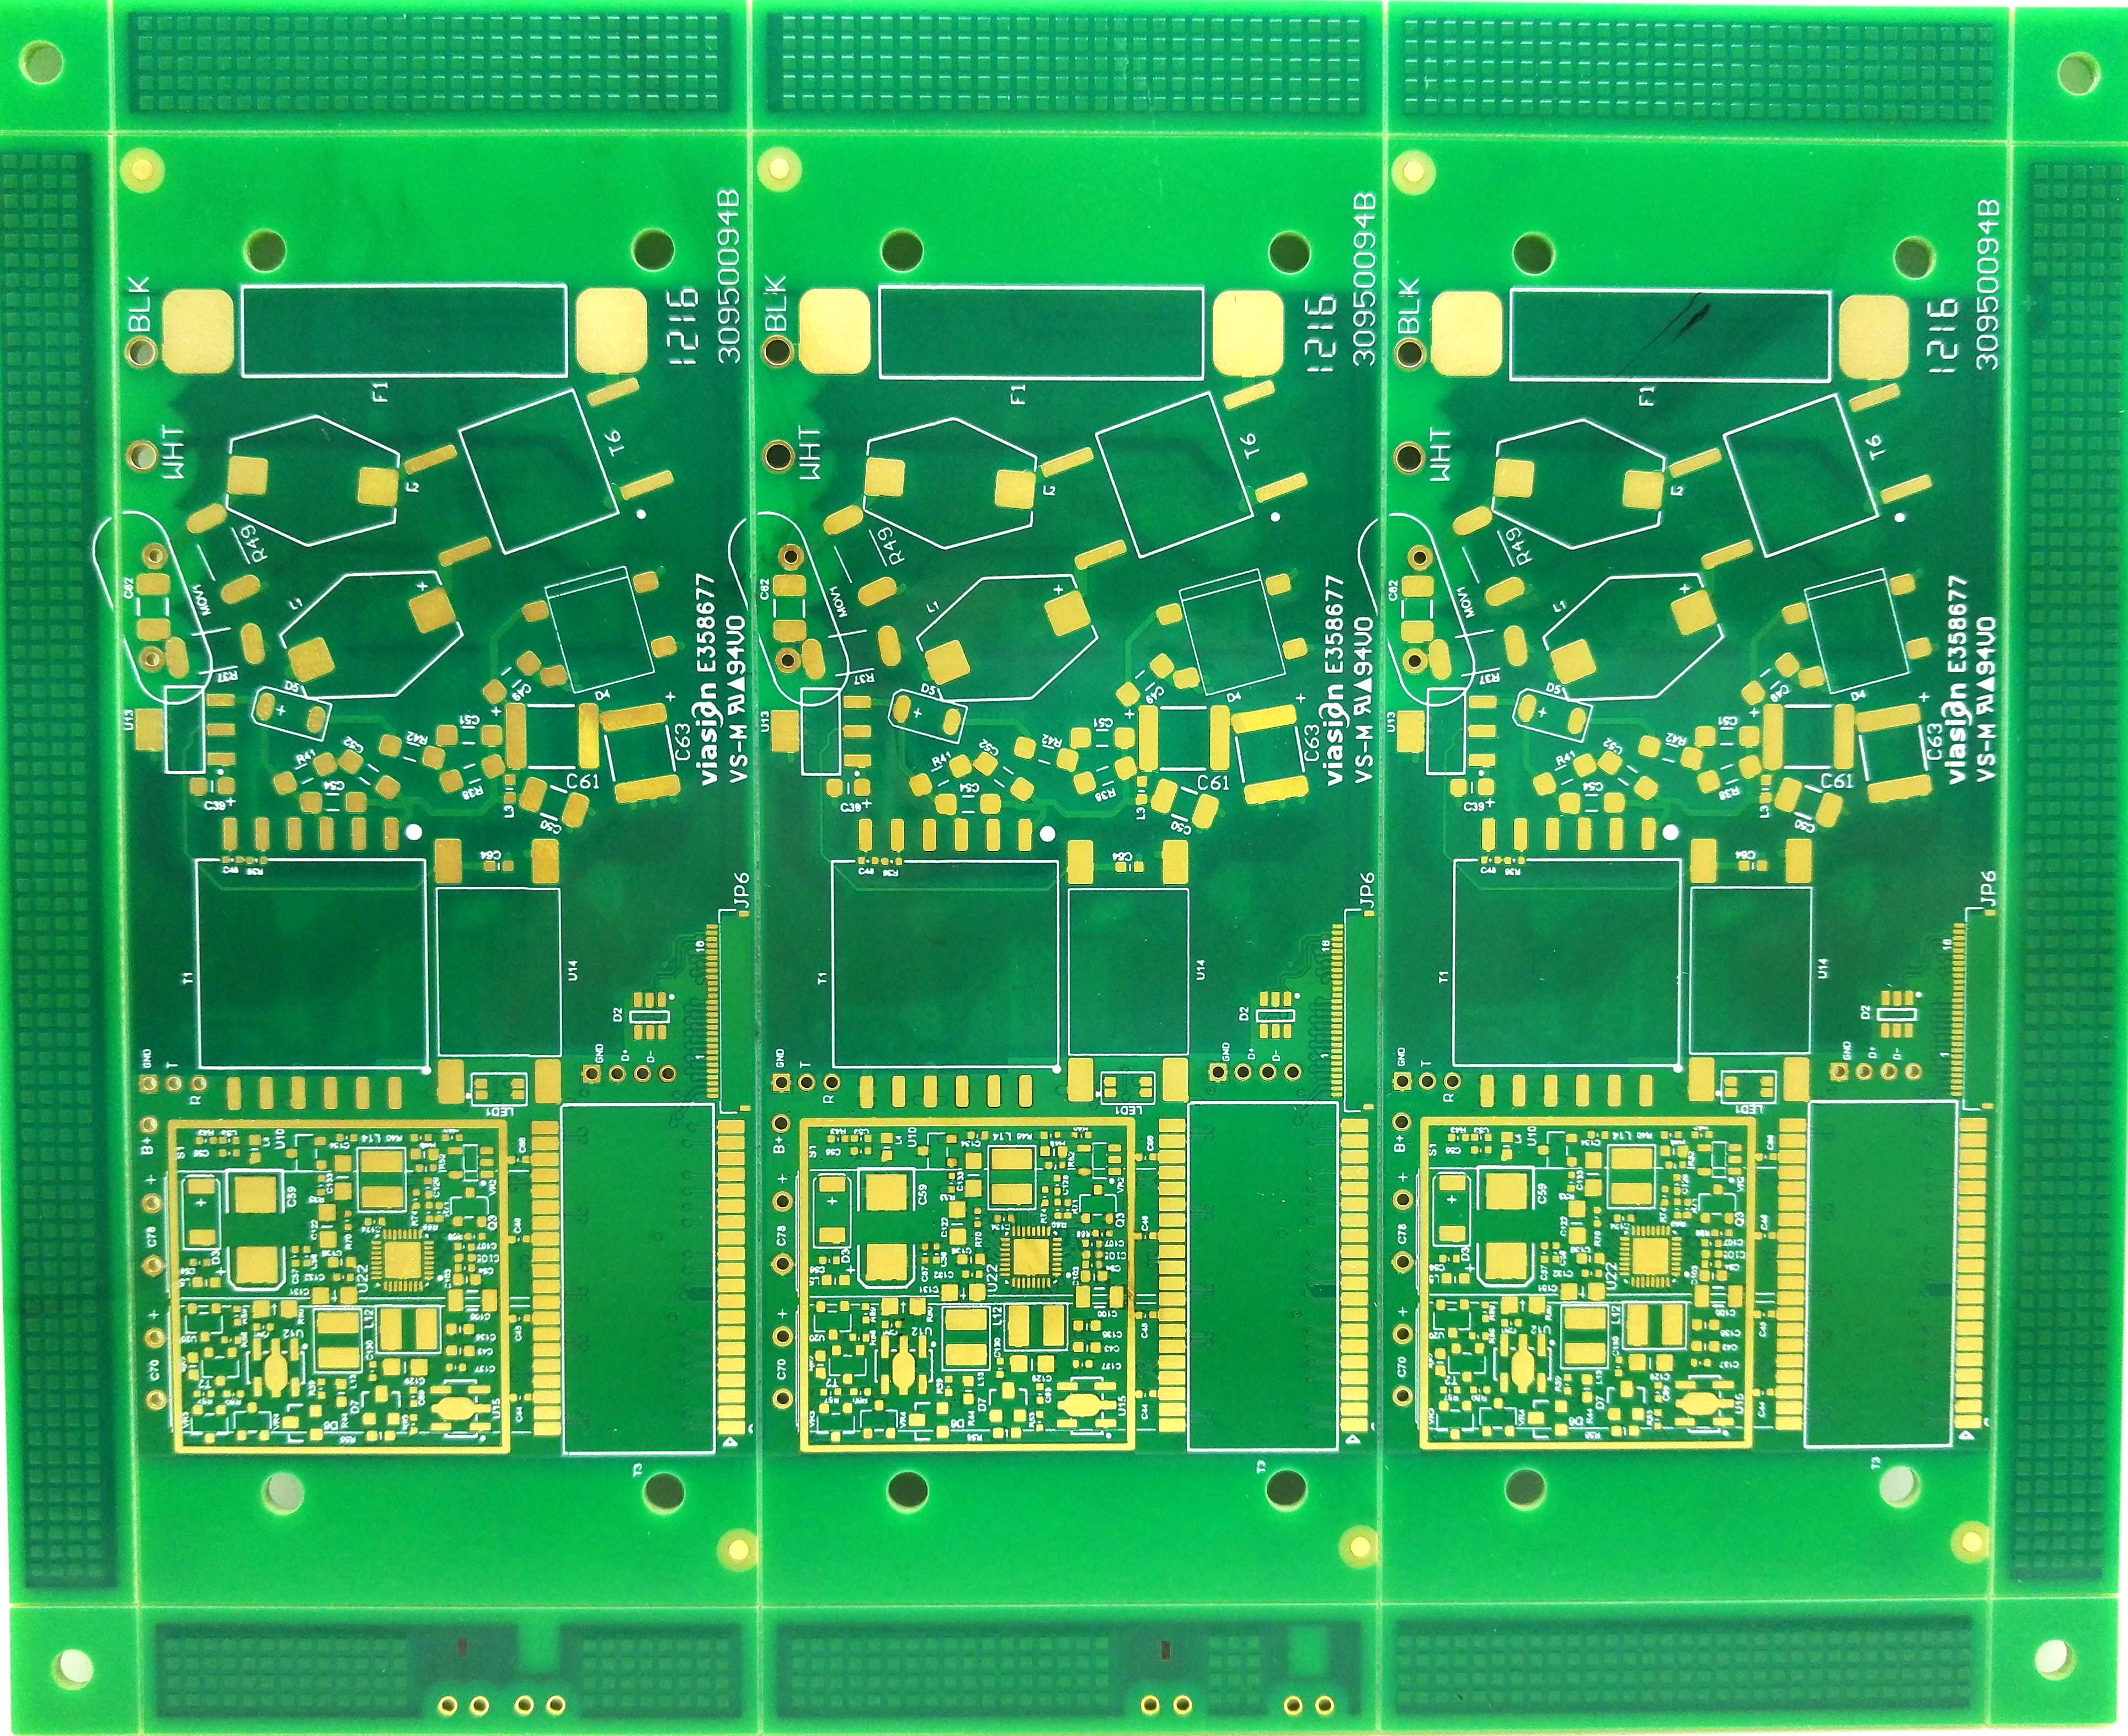 About PCB circuit board heat dissipation skills